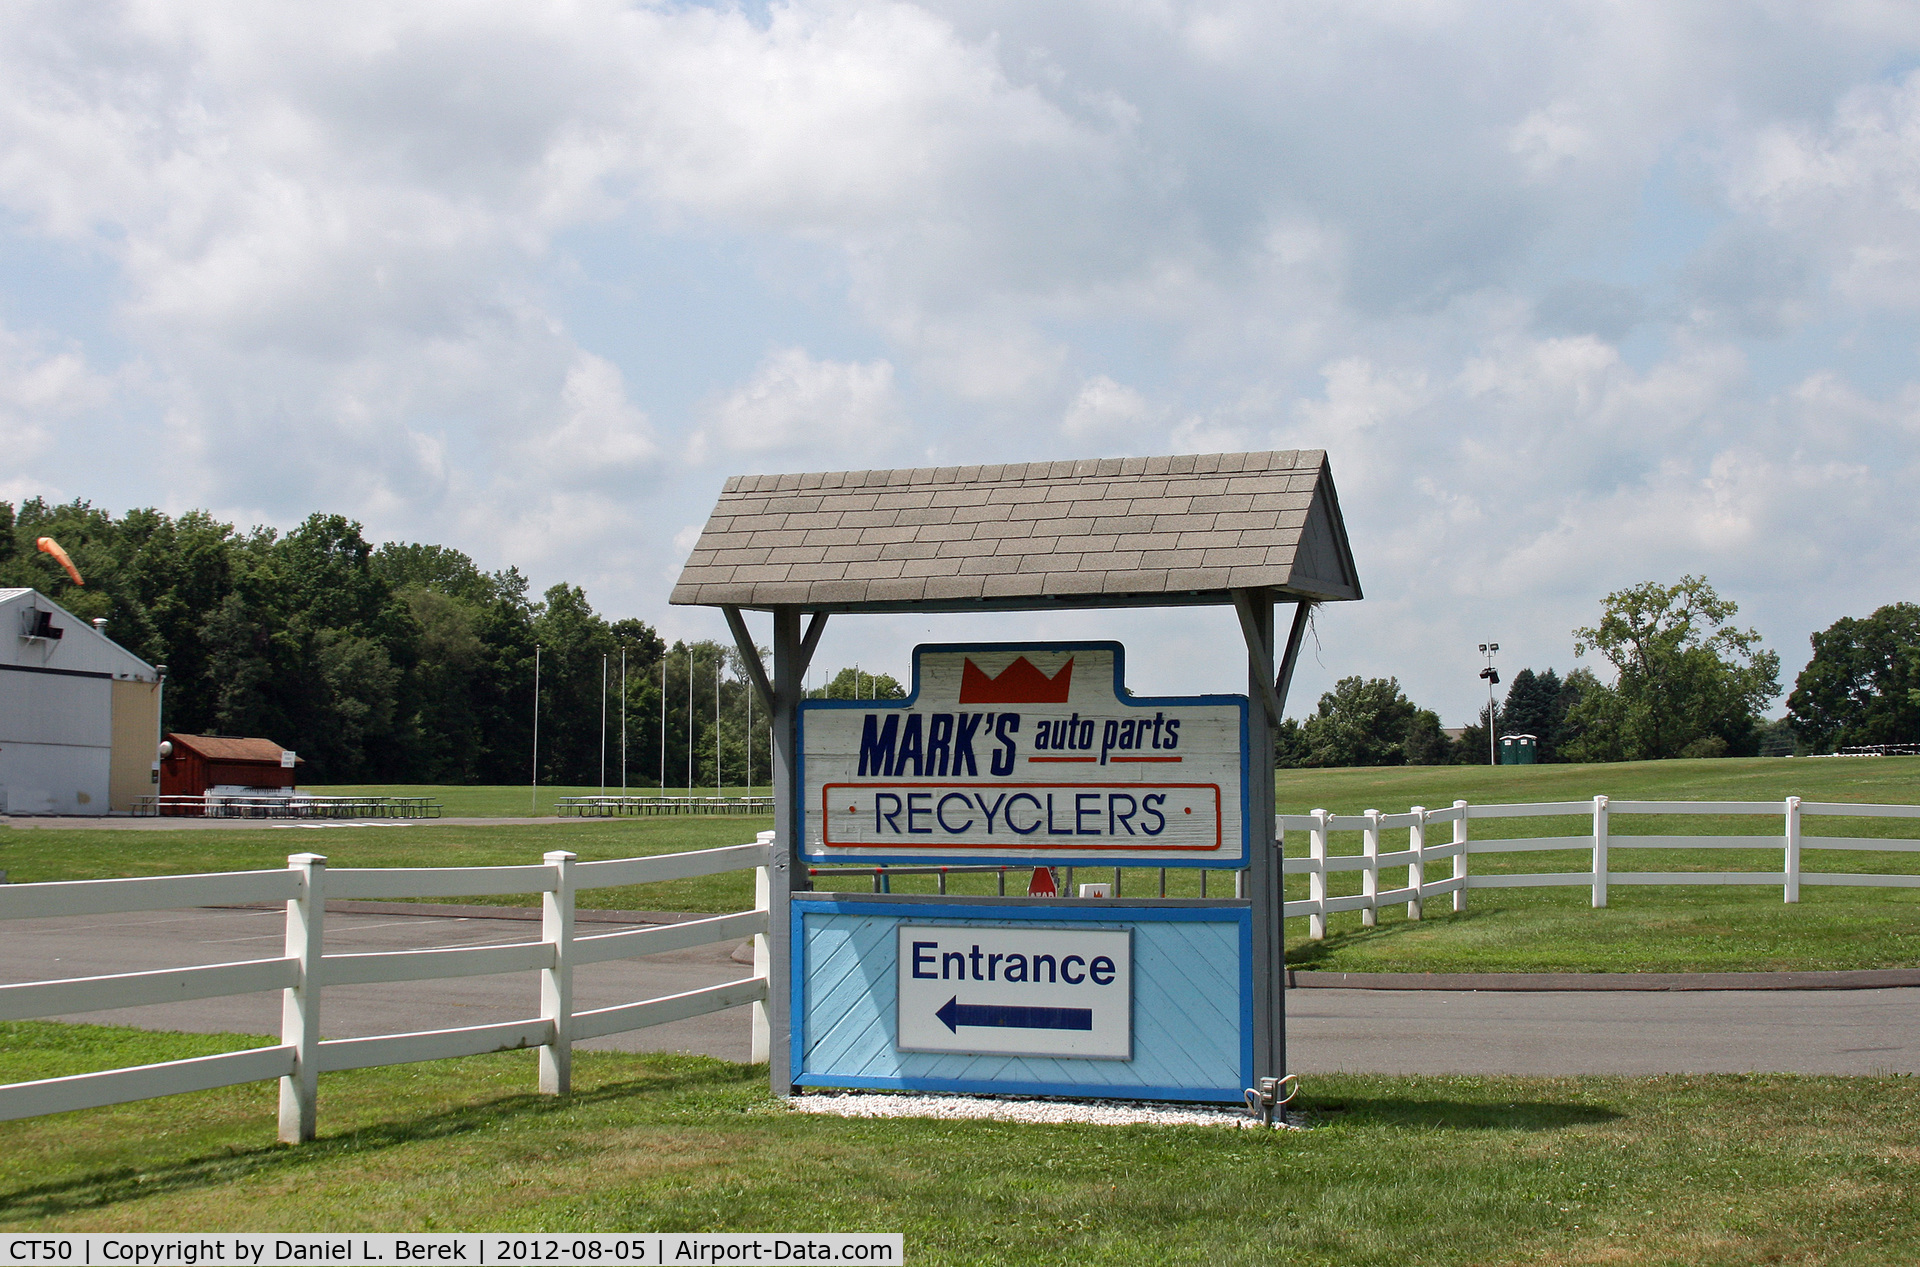 Marks Heliport (CT50) - This small business is located just off the periphery of Bradley International Airport.